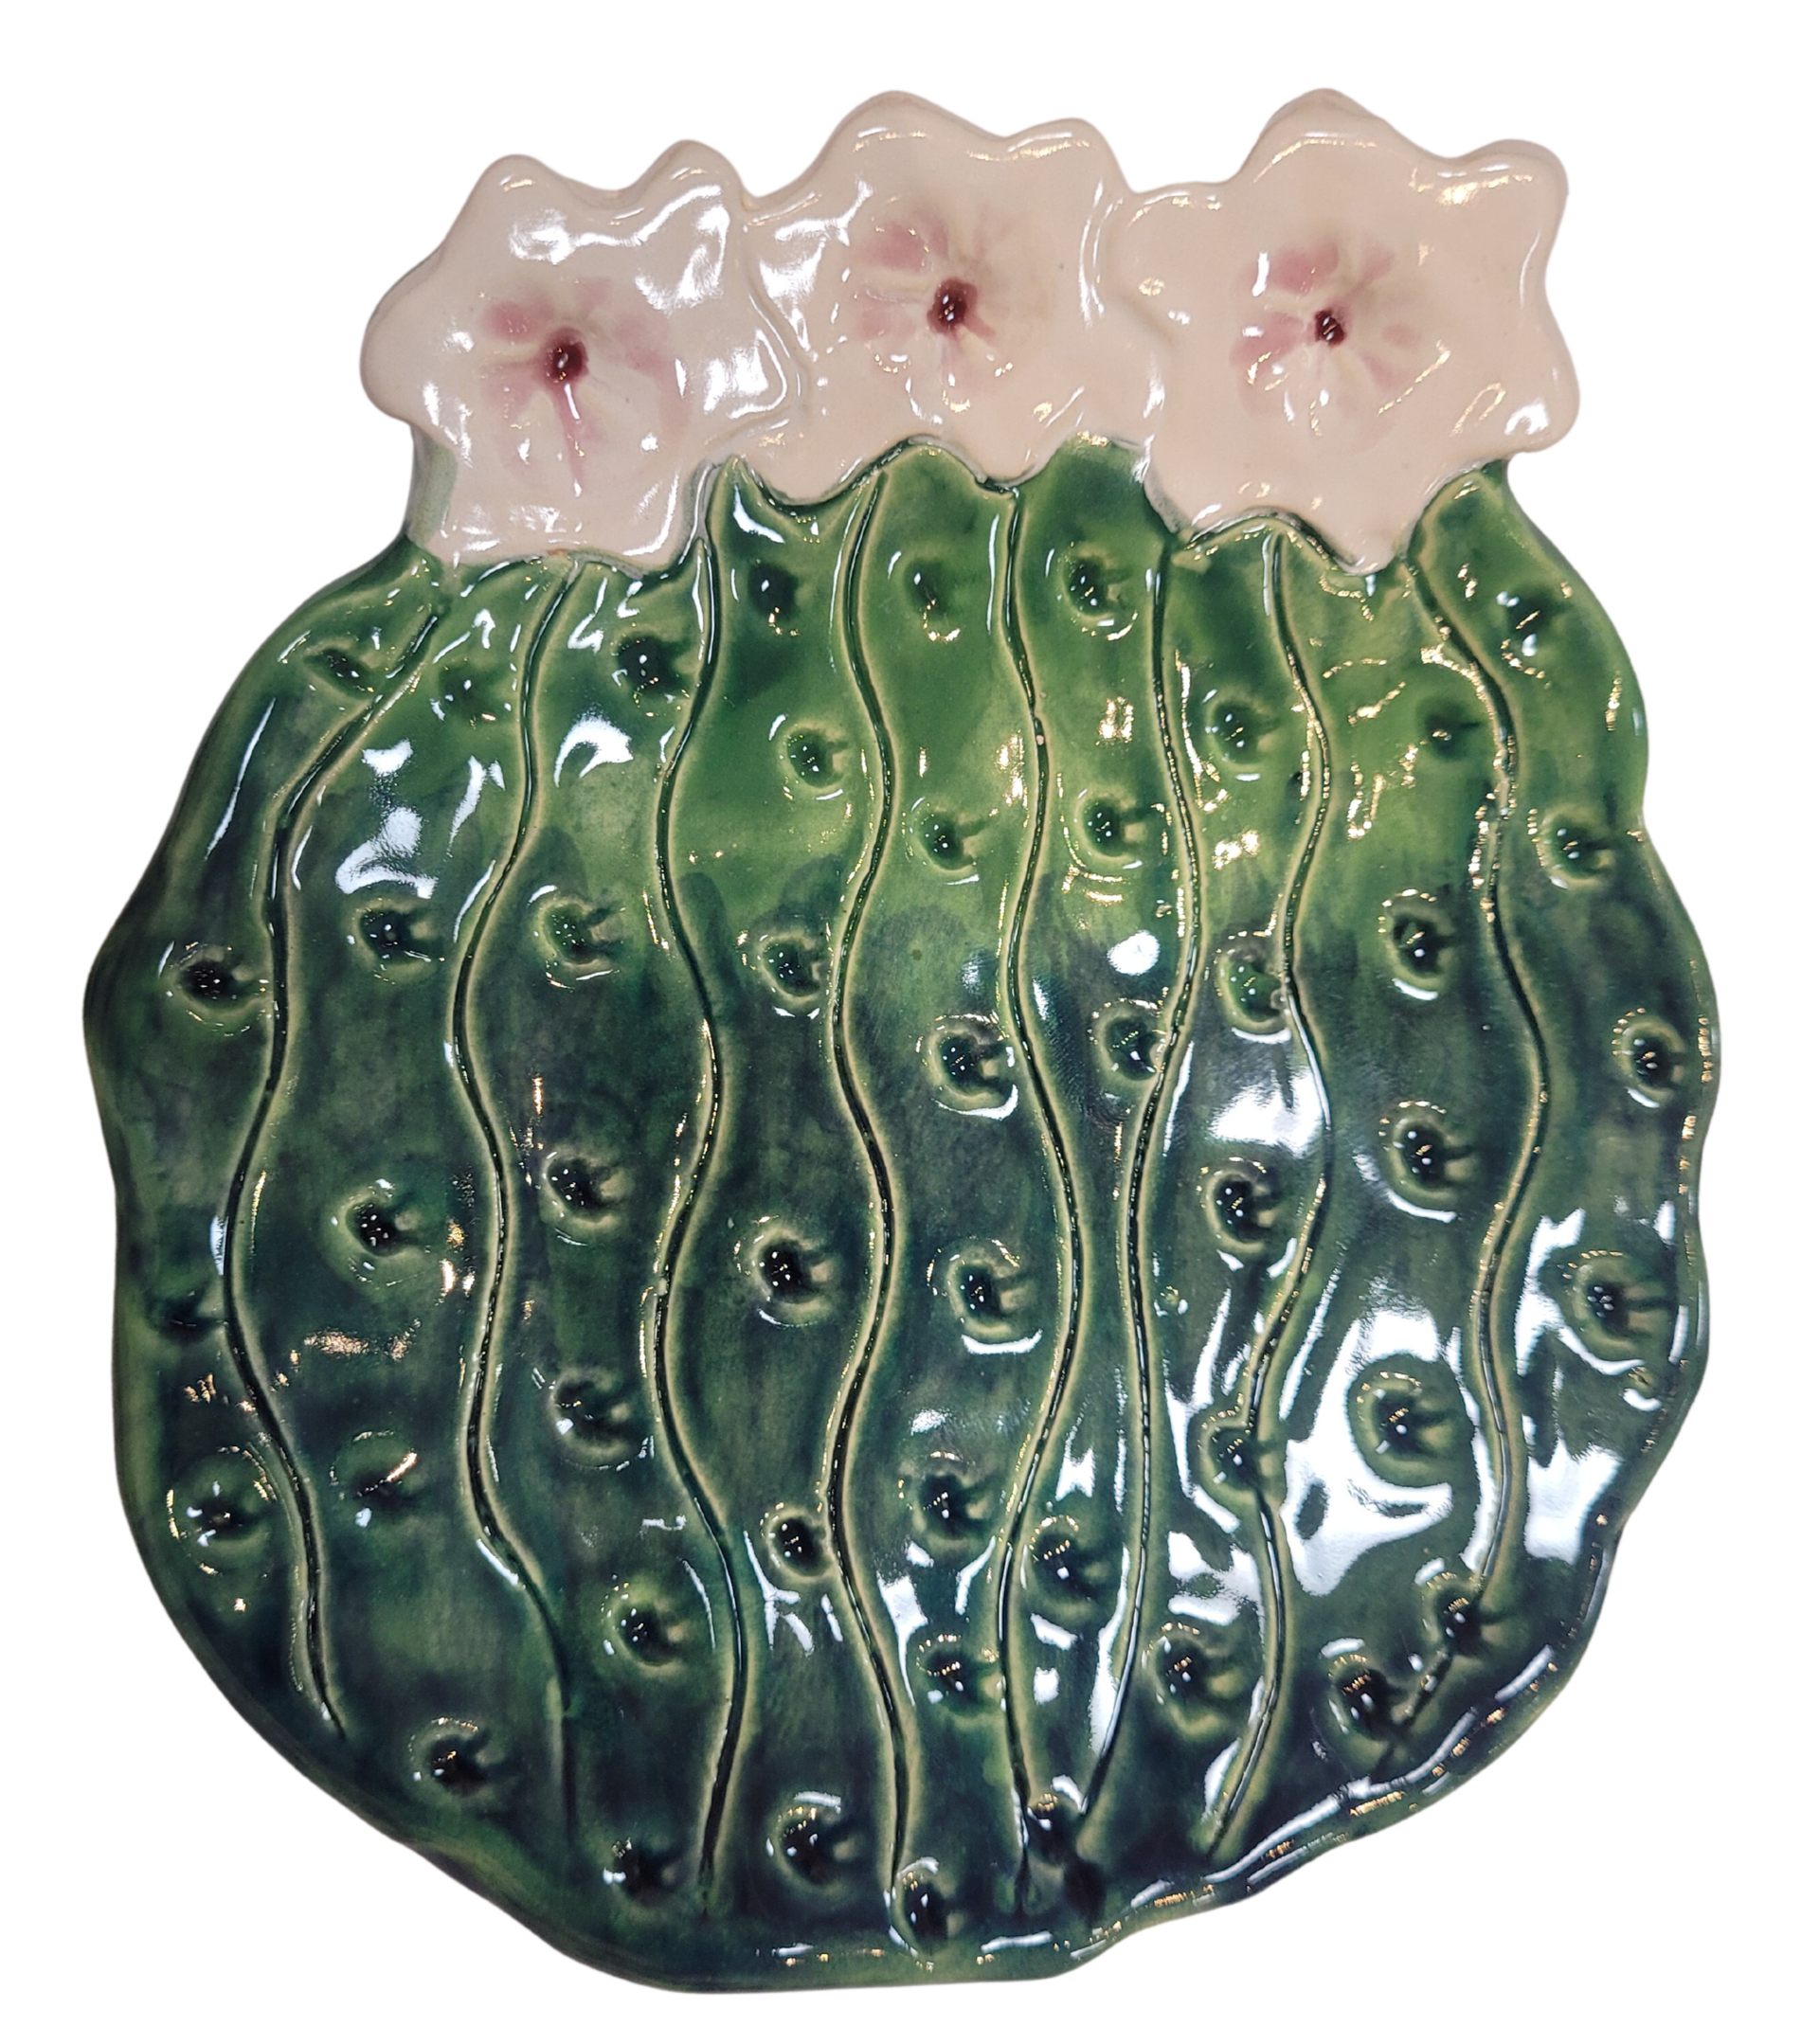 Short Barrel Cactus Spoon Rest -White Flowers by Robin Chlad